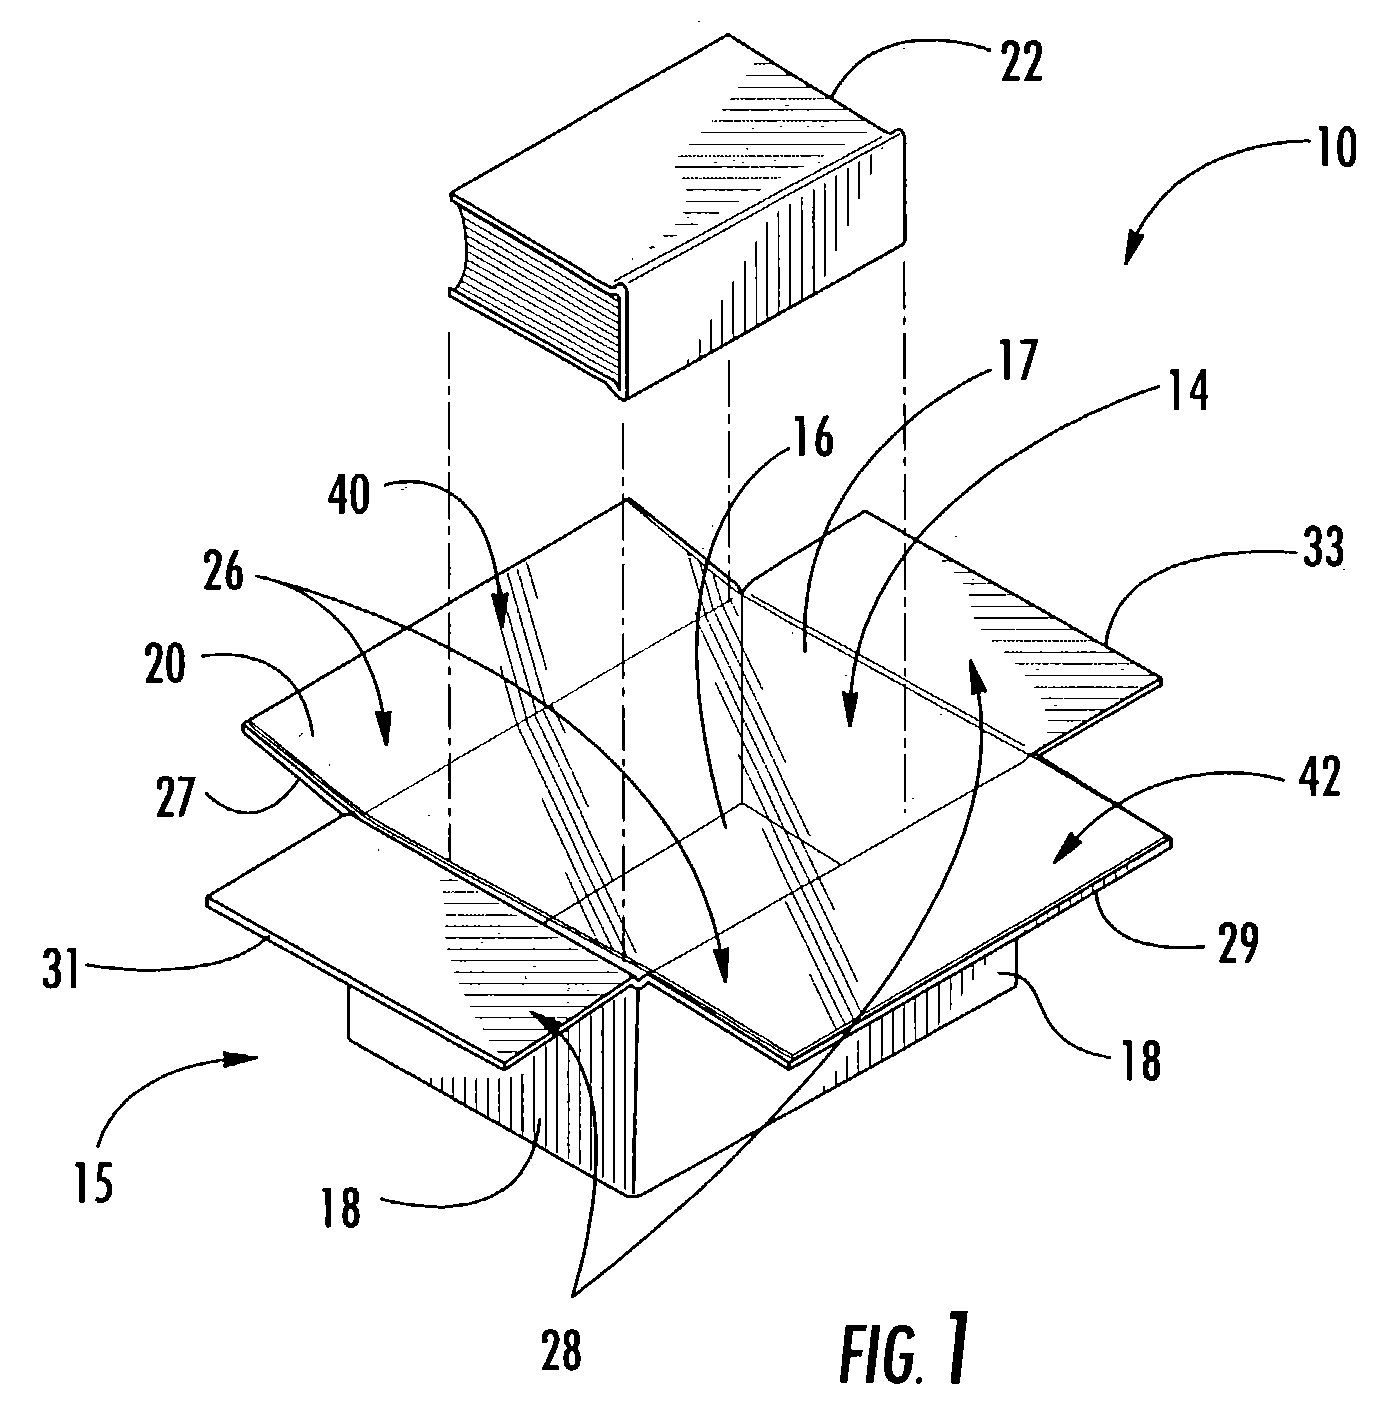 Packaging container with integrated sheet for retention of packaged article